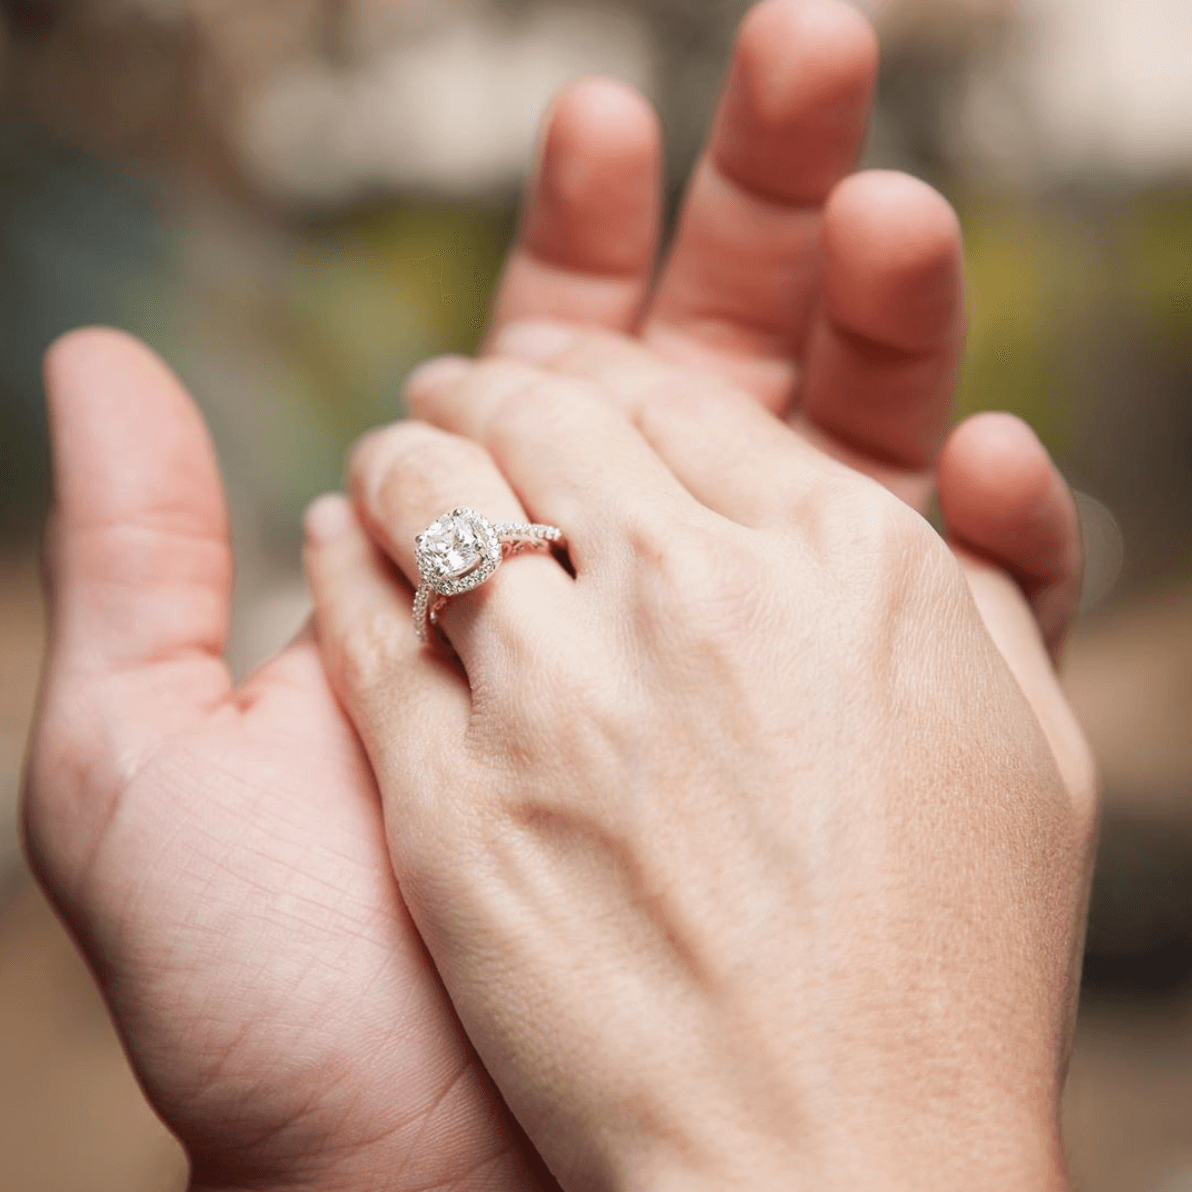 We Bust The Top 10 Engagement Ring Myths